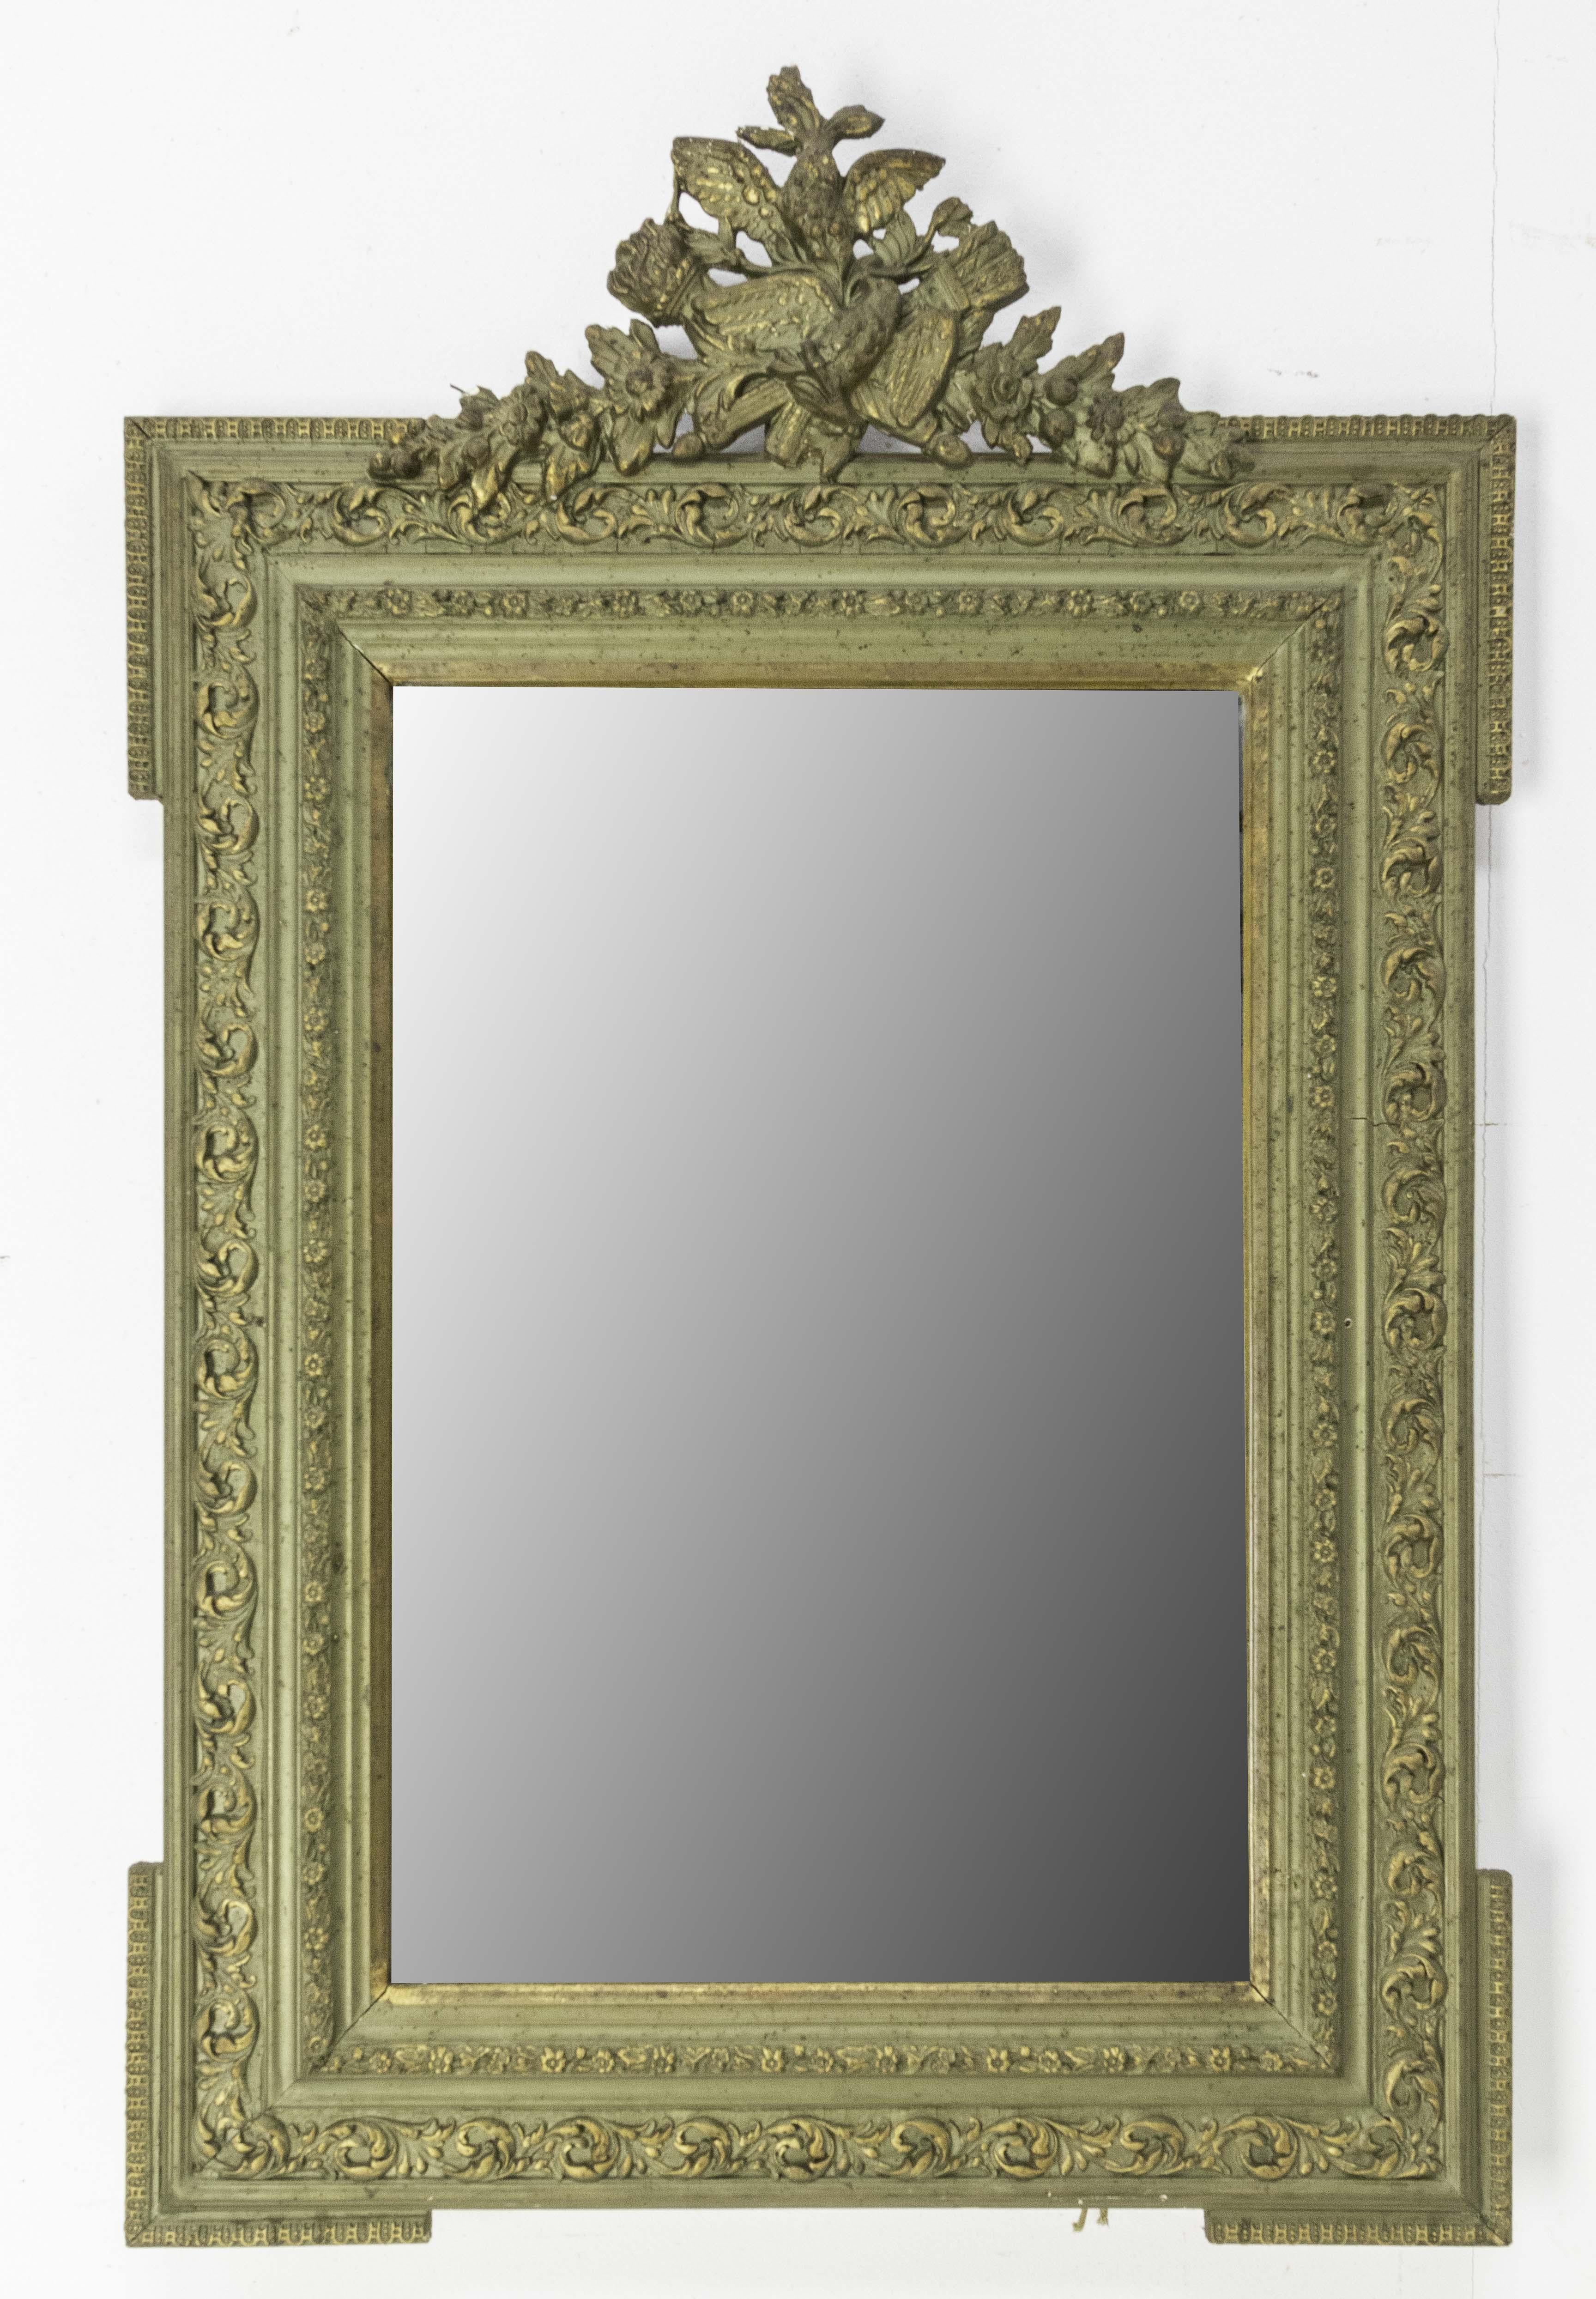 French bronze patina stucco mirror 
Beautiful frame with an ornamentation on the top with two birds on a vegetal decor 
Plant decoration on the stucco frame.
Original mirror
Made circa 1890.

Shipping:
L65 P7 H87,5 cm 7 Kg.